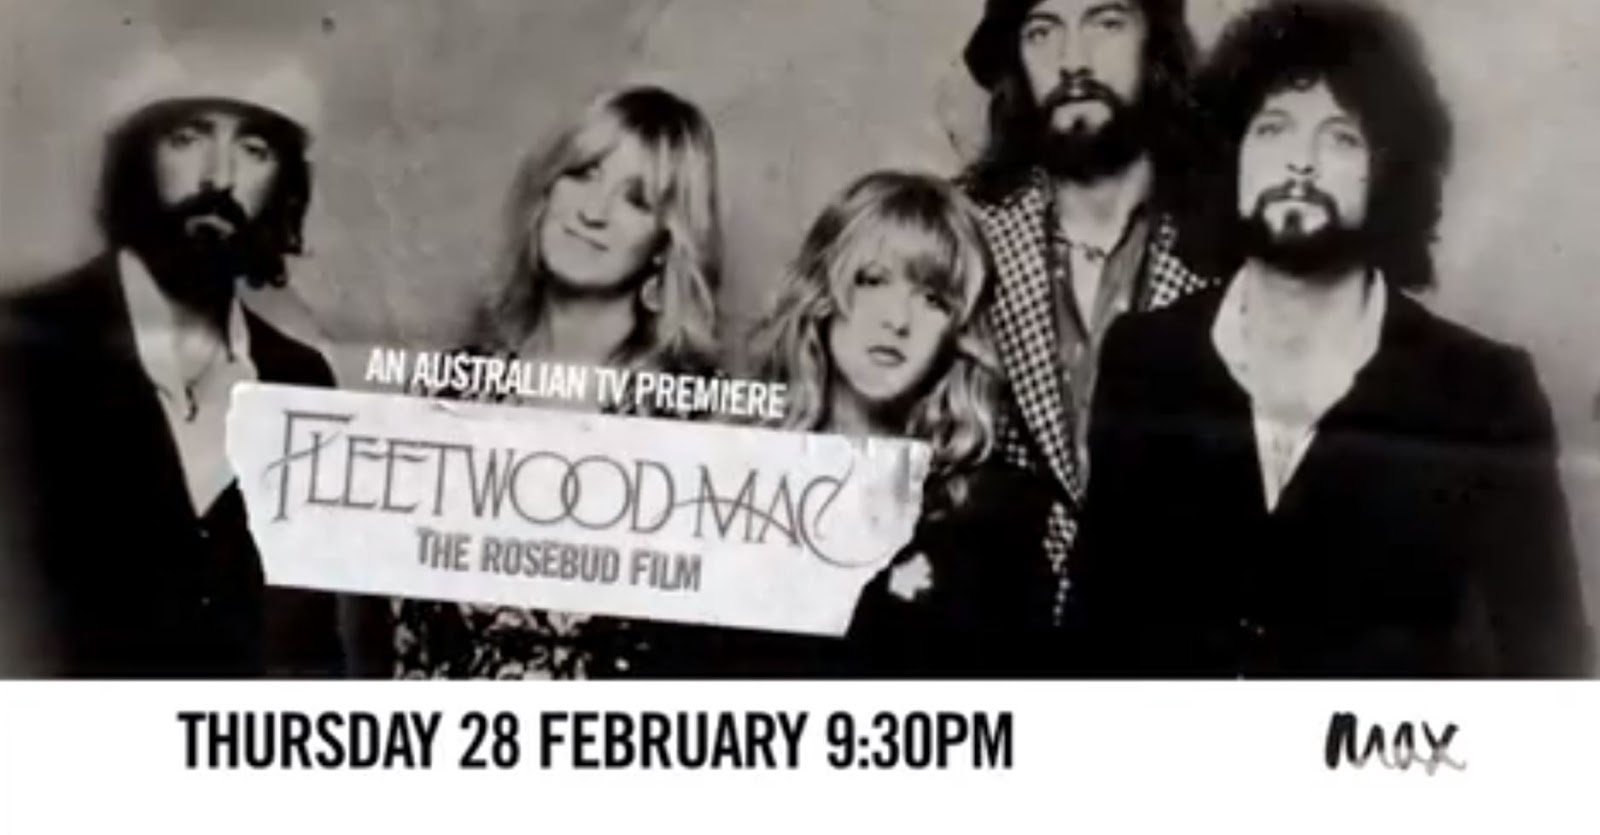 Fleetwood Mac Don T Stop Documentary Download